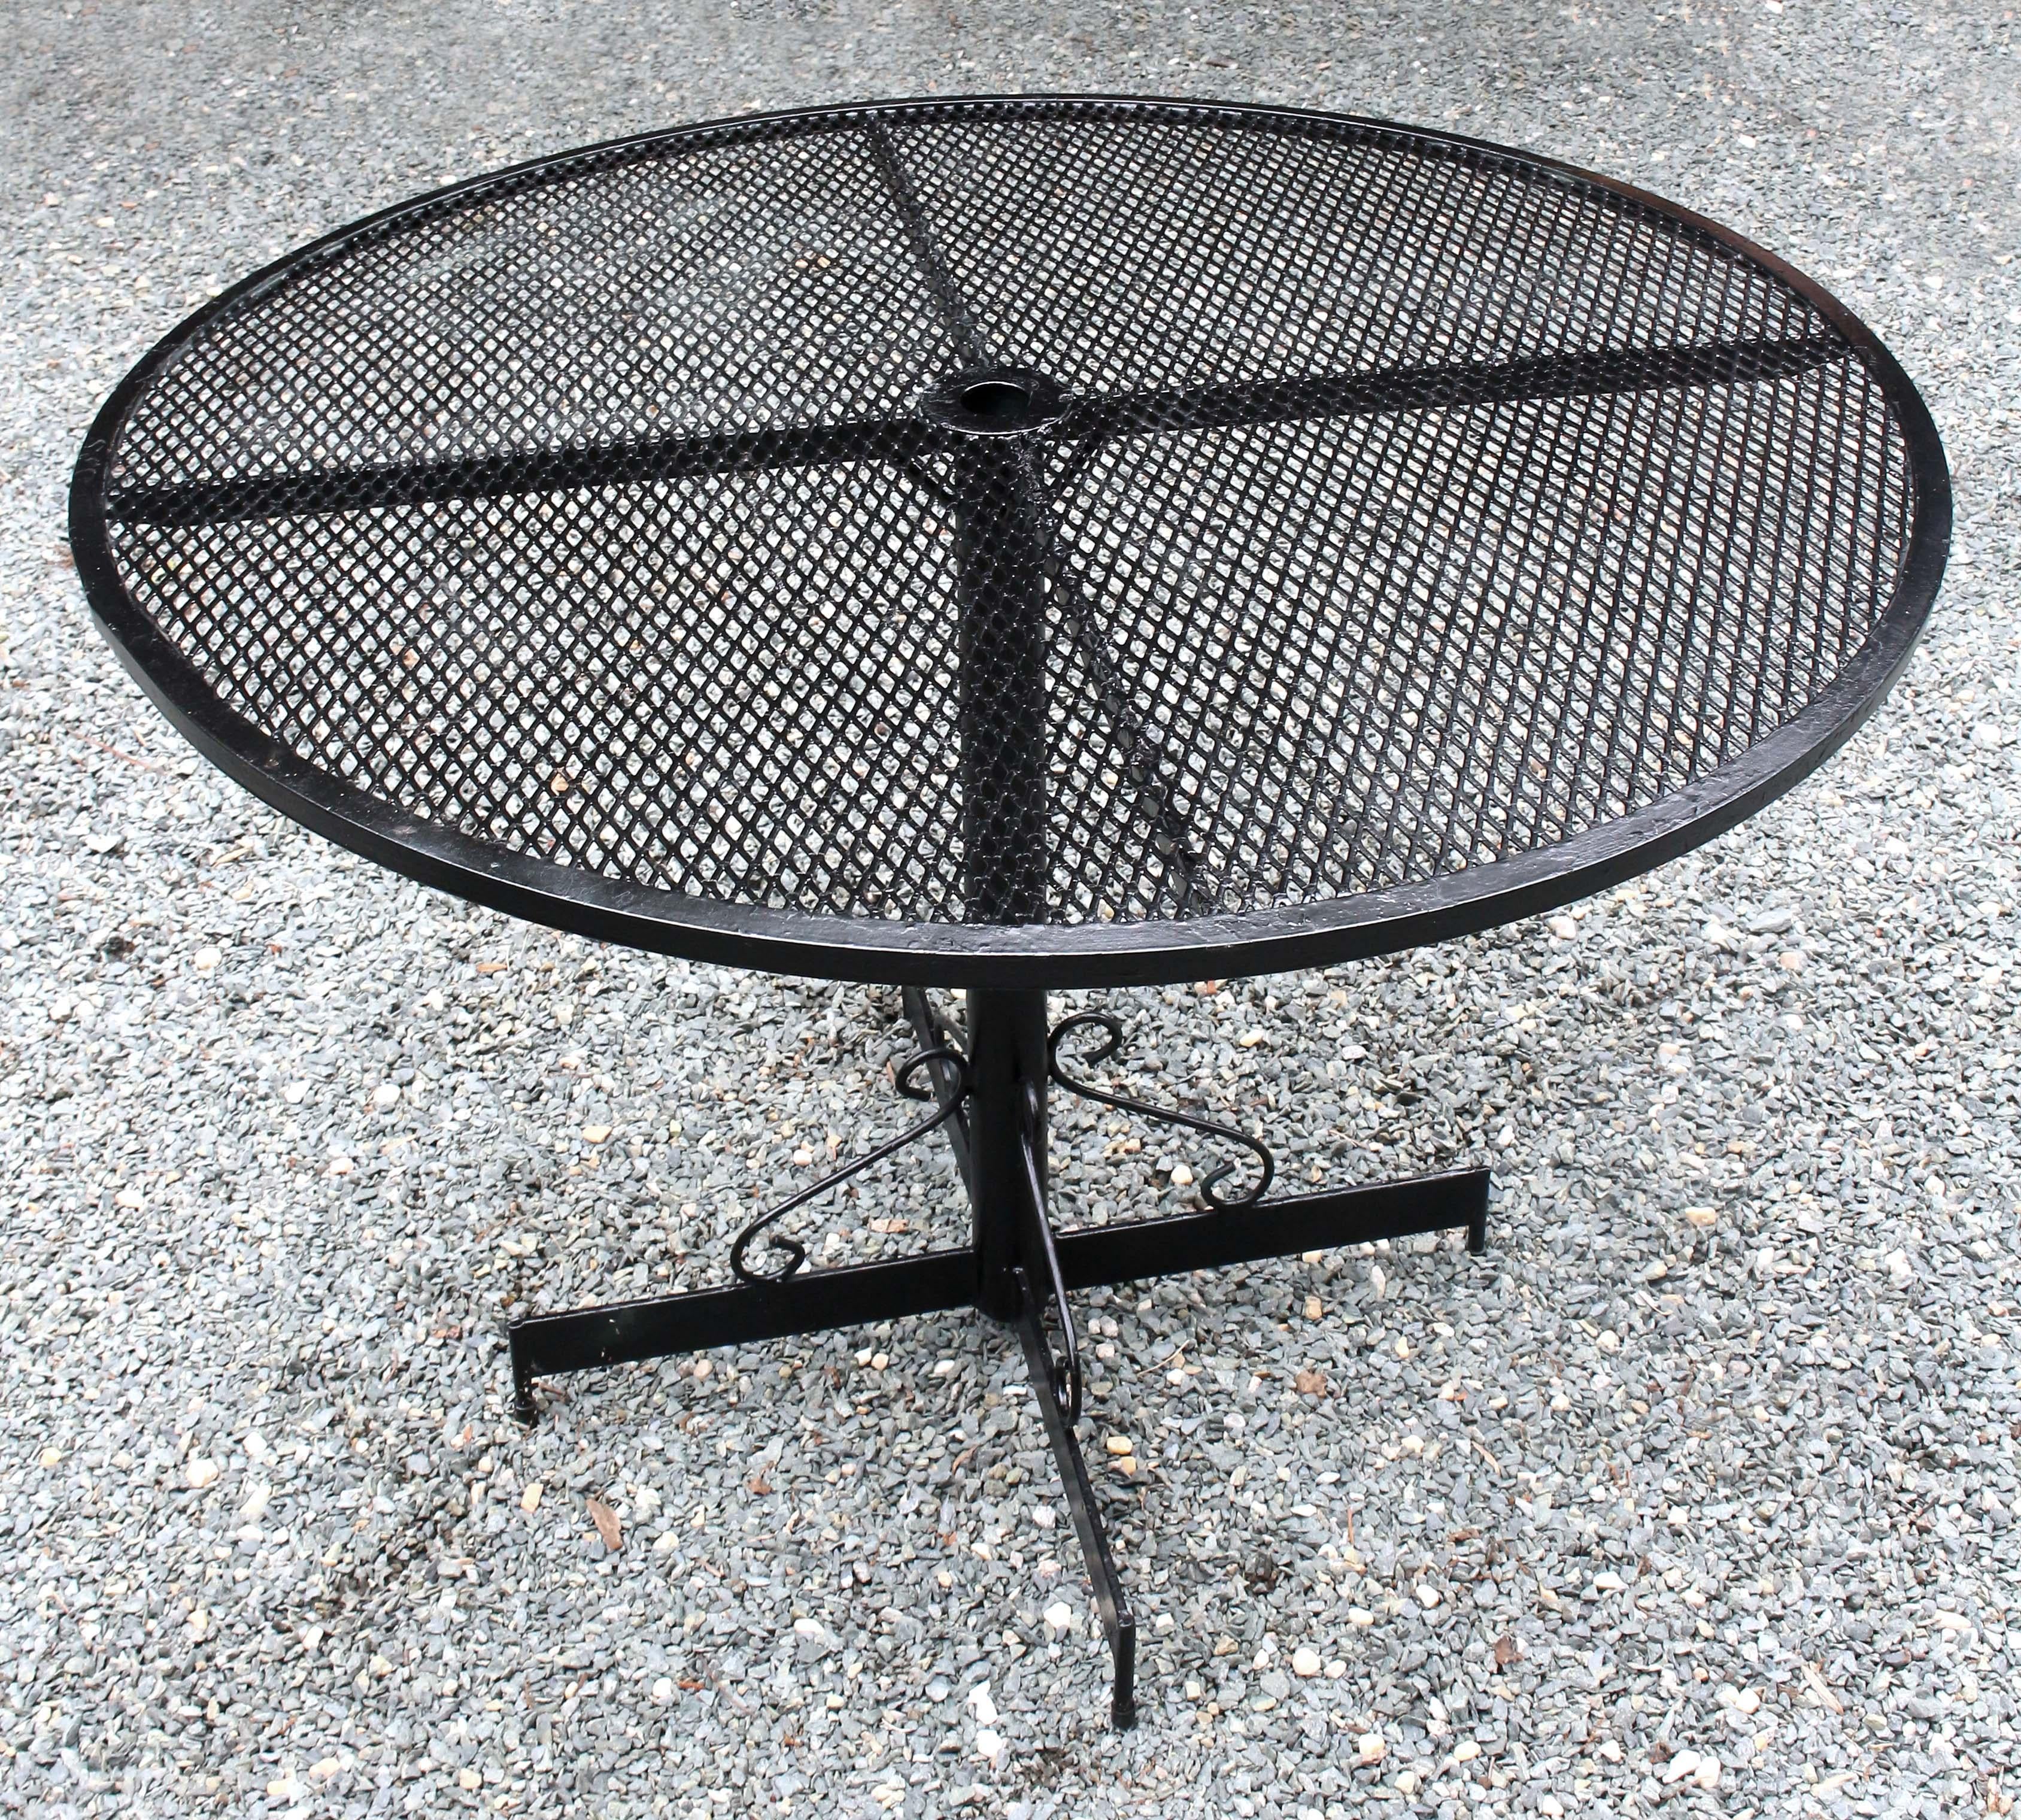 Circa 1950-70 wrought iron outdoor table & four arm chairs. Attributed to Salterini. Comfortable rounded backs & scrolled arms; the scroll picked up in the front leg decoration. Iron mesh seat & back. Note the rear legs which point down, rather then